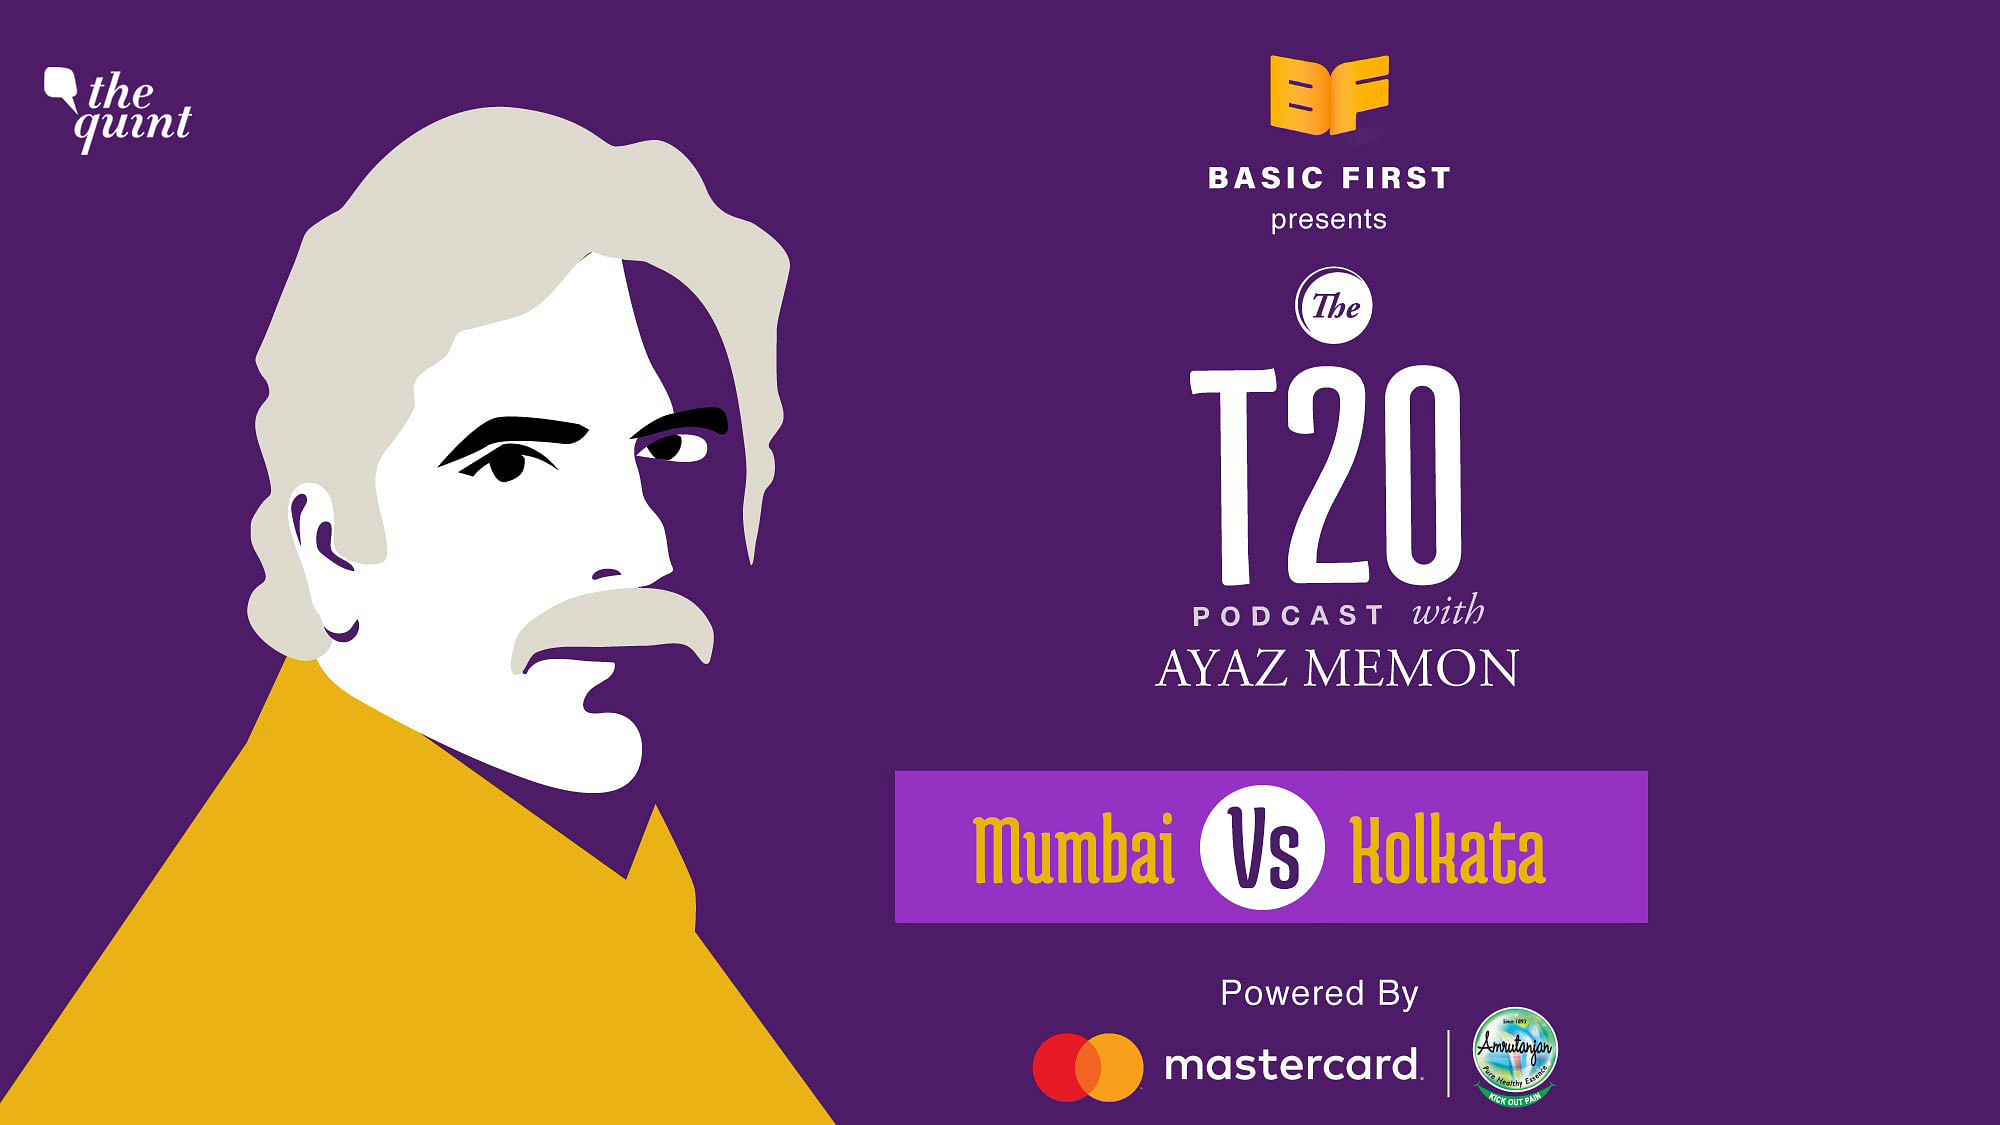 On Episode 32 of The T20 Podcast, Ayaz Memon and Mendra Dorjey talk about Mumbai’s solid 8 wicket victory over Kolkata.